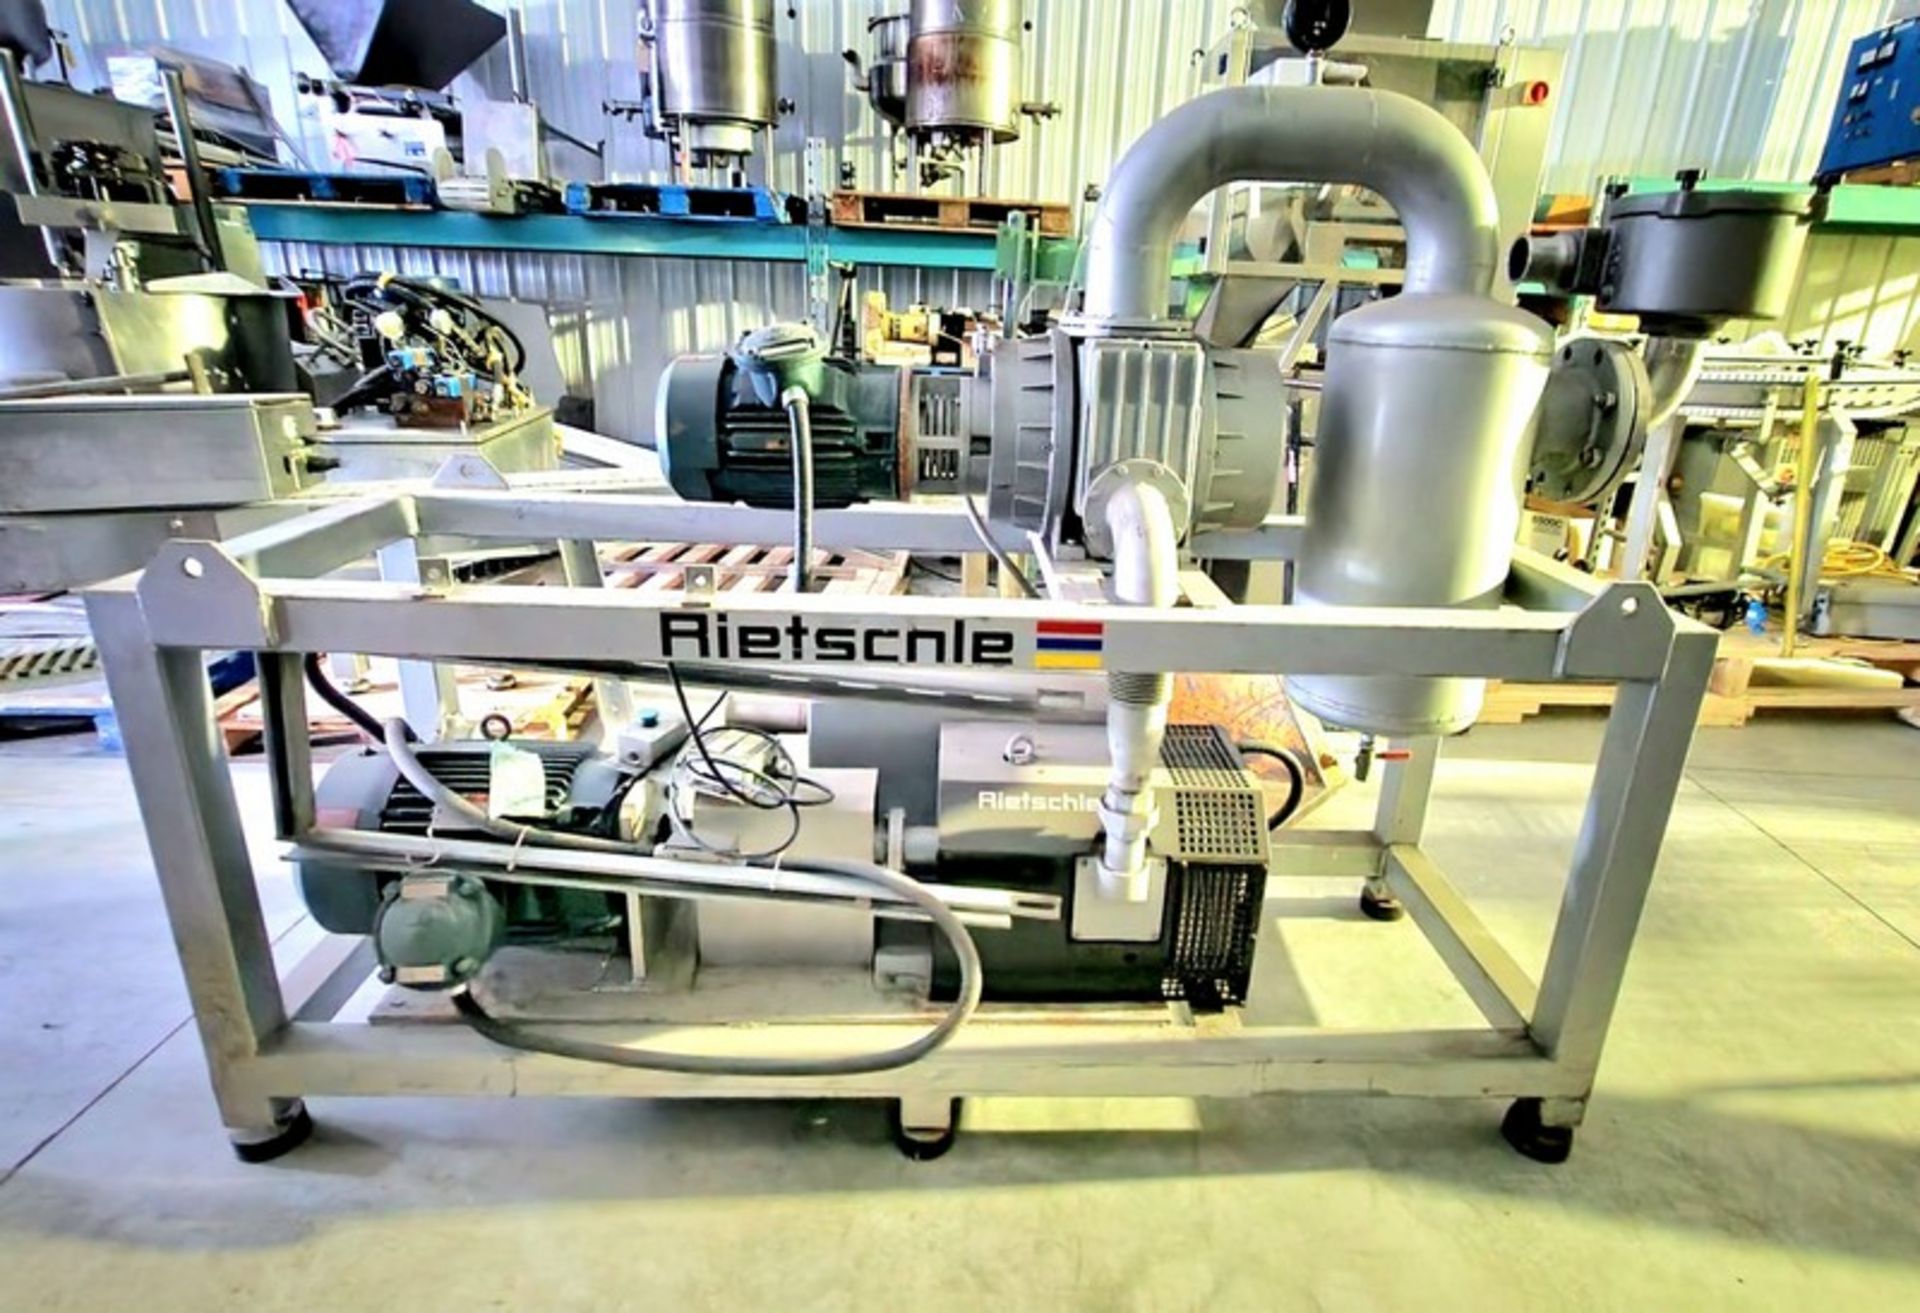 Rietschle Vacuum System modele VC300 01, 02567-0113 TYPE 1000 575volts / 5.20 / 3PH /60Hz 1 / SF 1, - Image 8 of 11